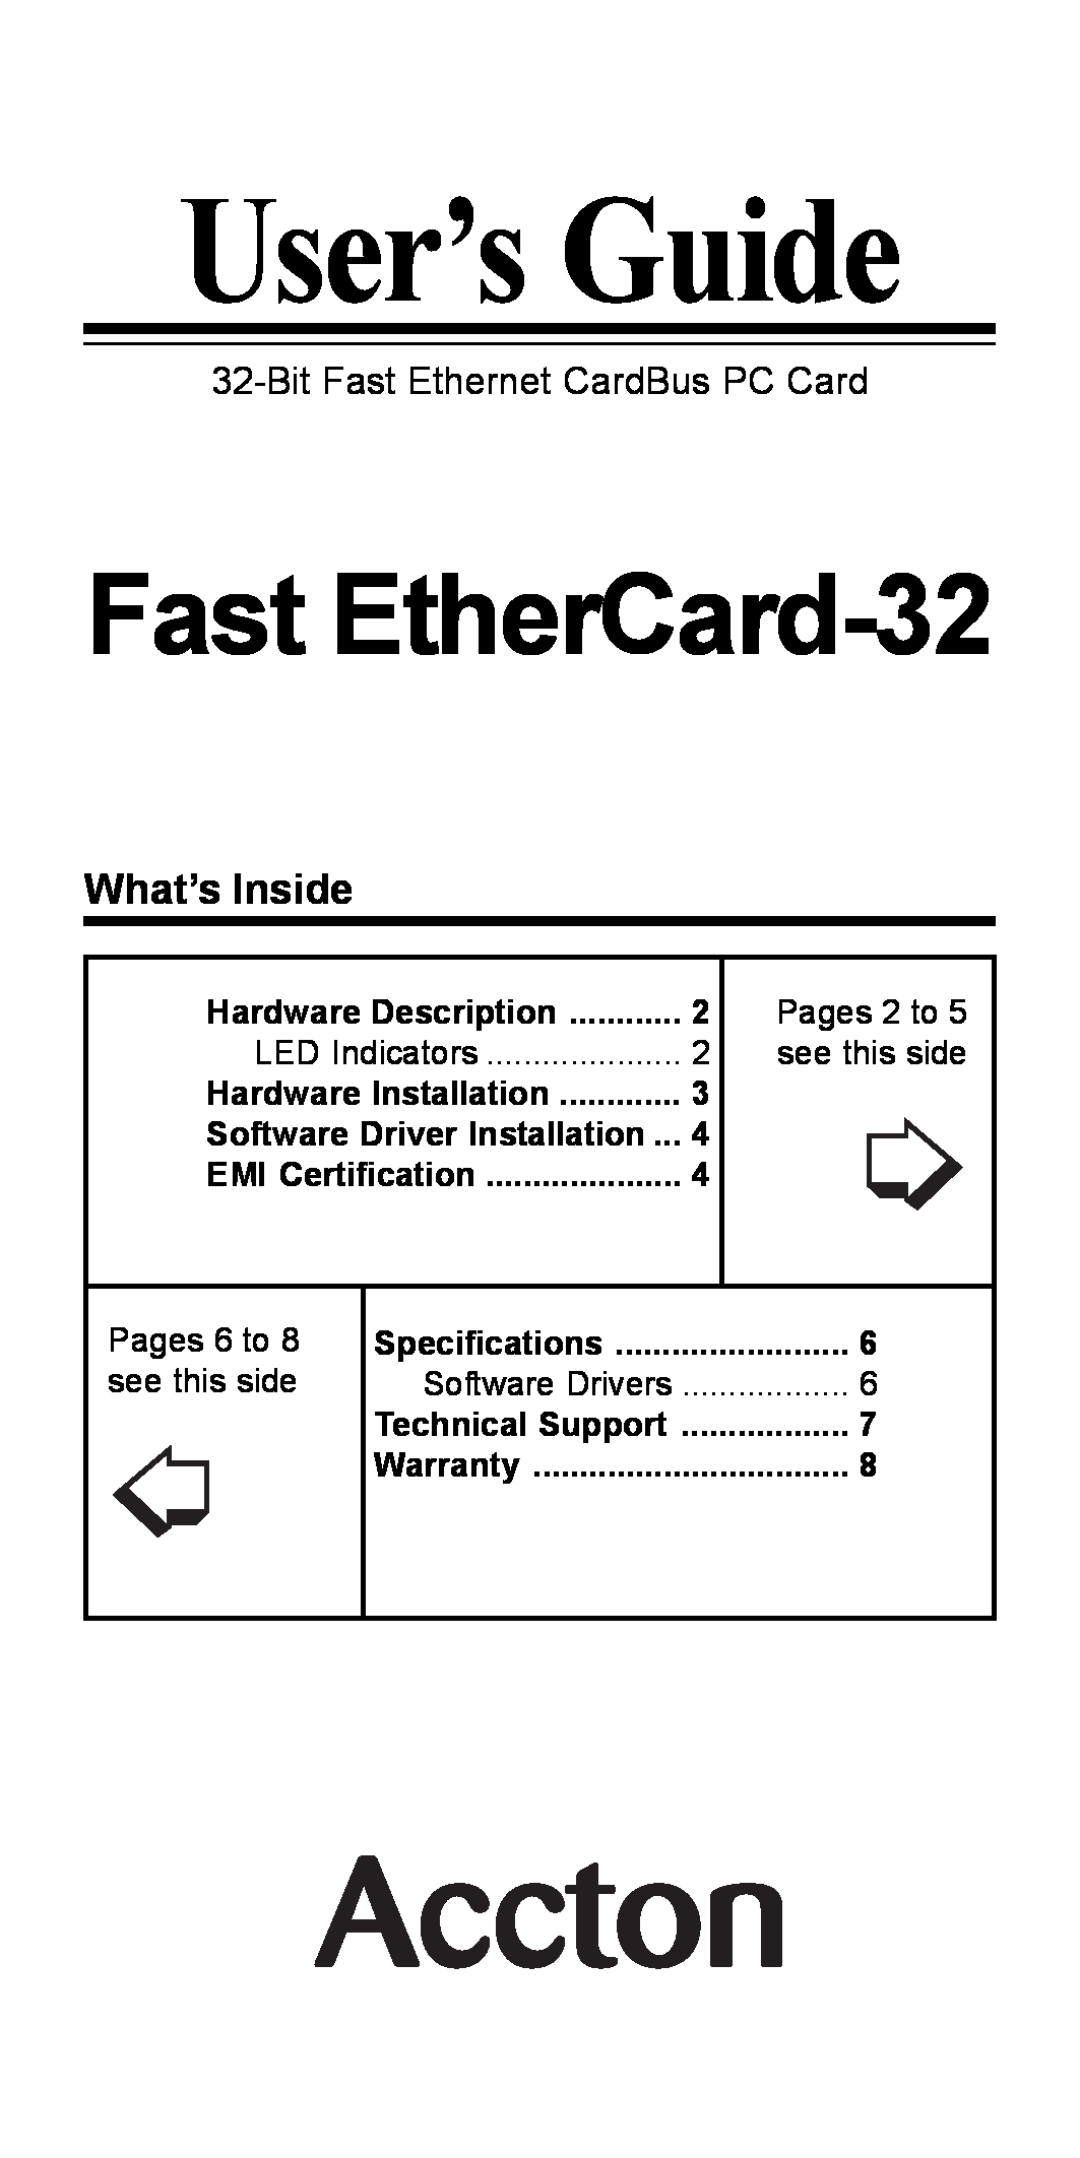 Accton Technology specifications What’s Inside, User’s Guide, Fast EtherCard-32, Bit Fast Ethernet CardBus PC Card 